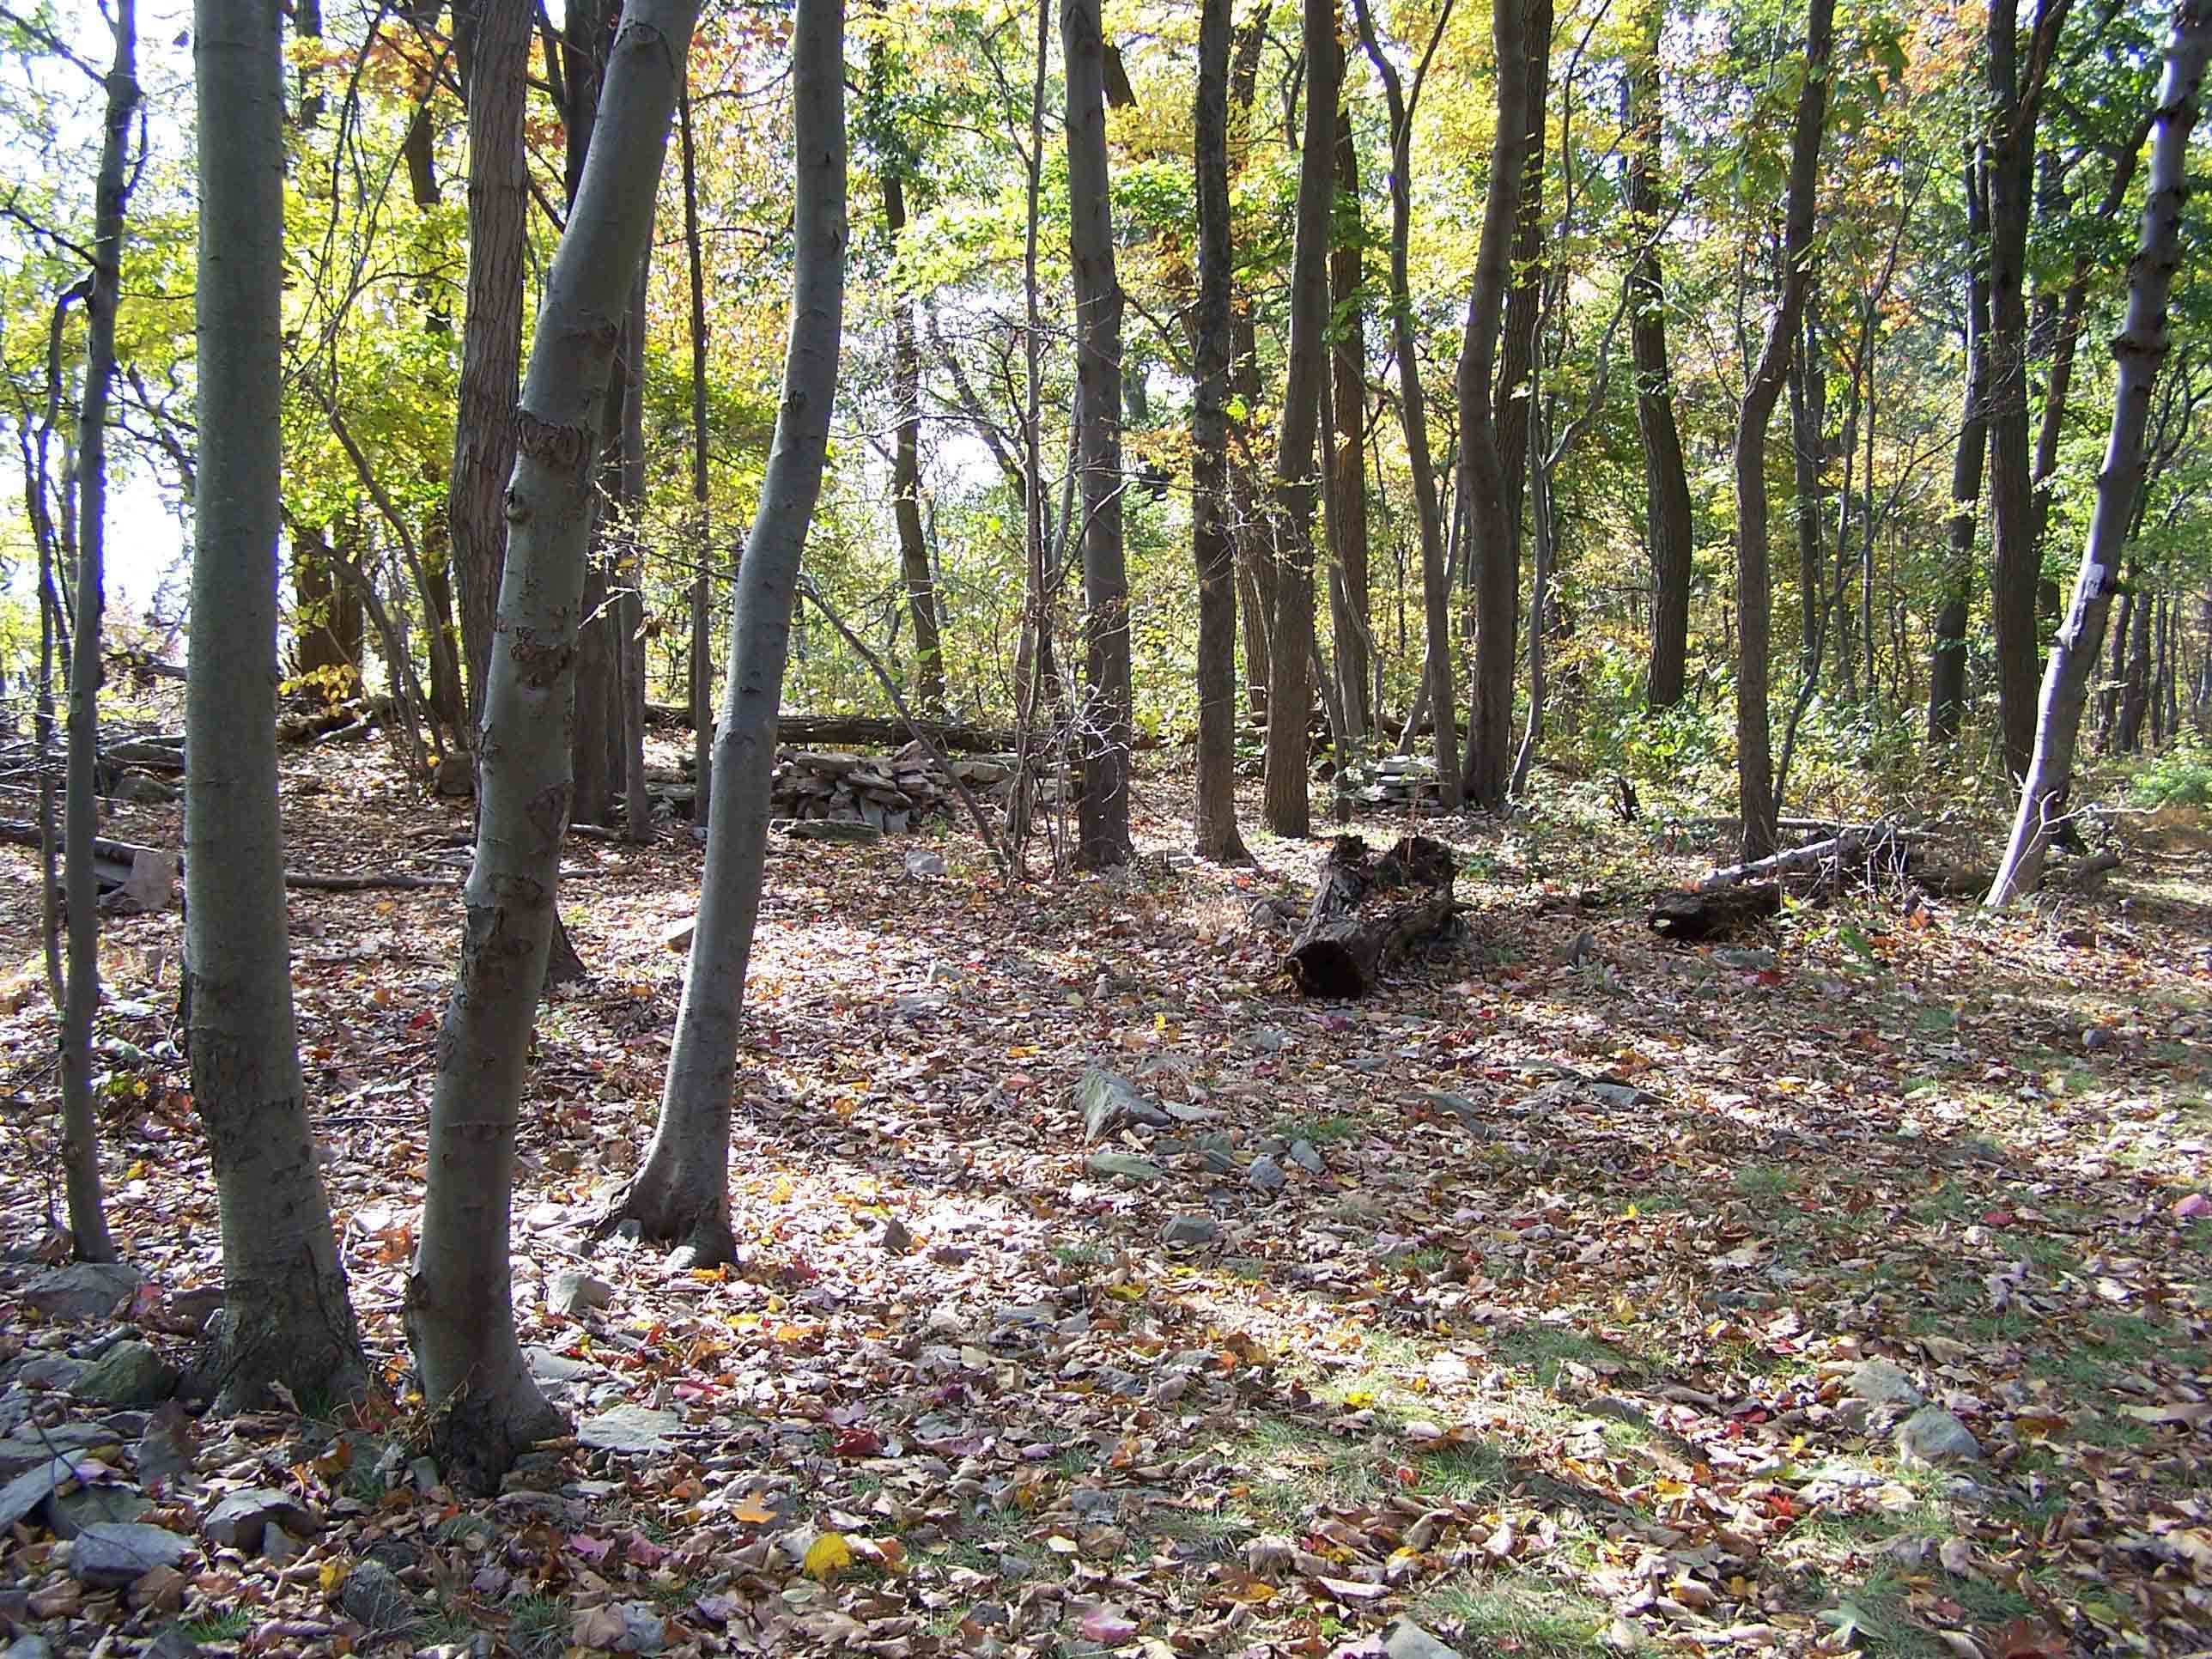 Campsites on trail north of Swatara Gap - south of William Penn Shelter. Courtesy at@rohland.org